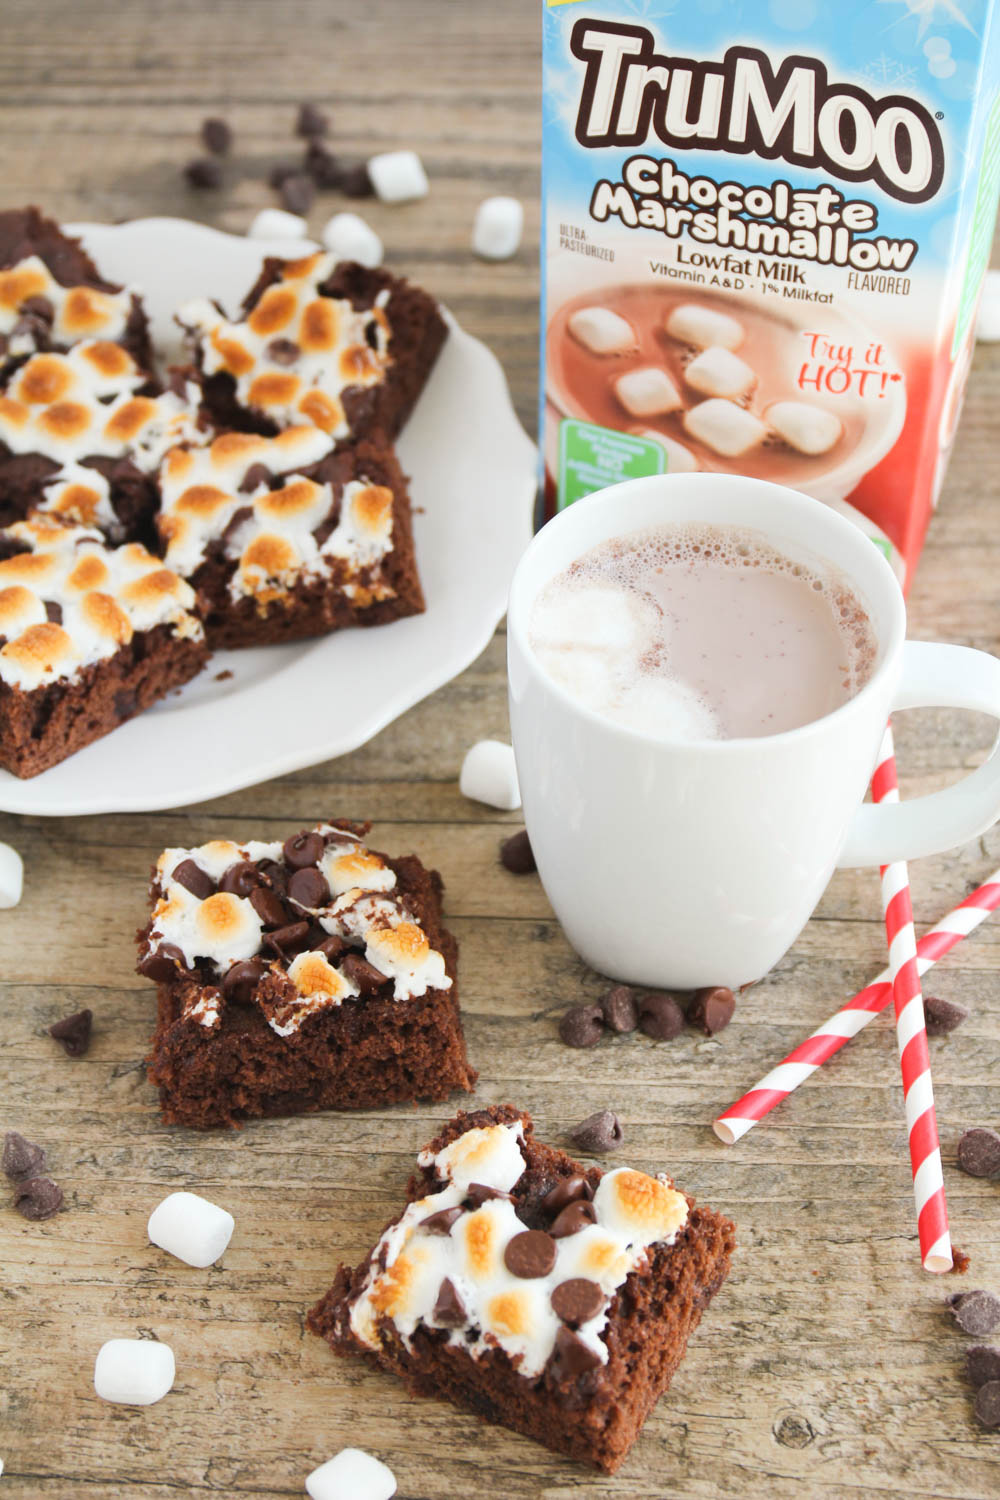 These chocolate marshmallow brownies are ooey-gooey delicious, and perfect with a warm mug of TruMoo chocolate milk!